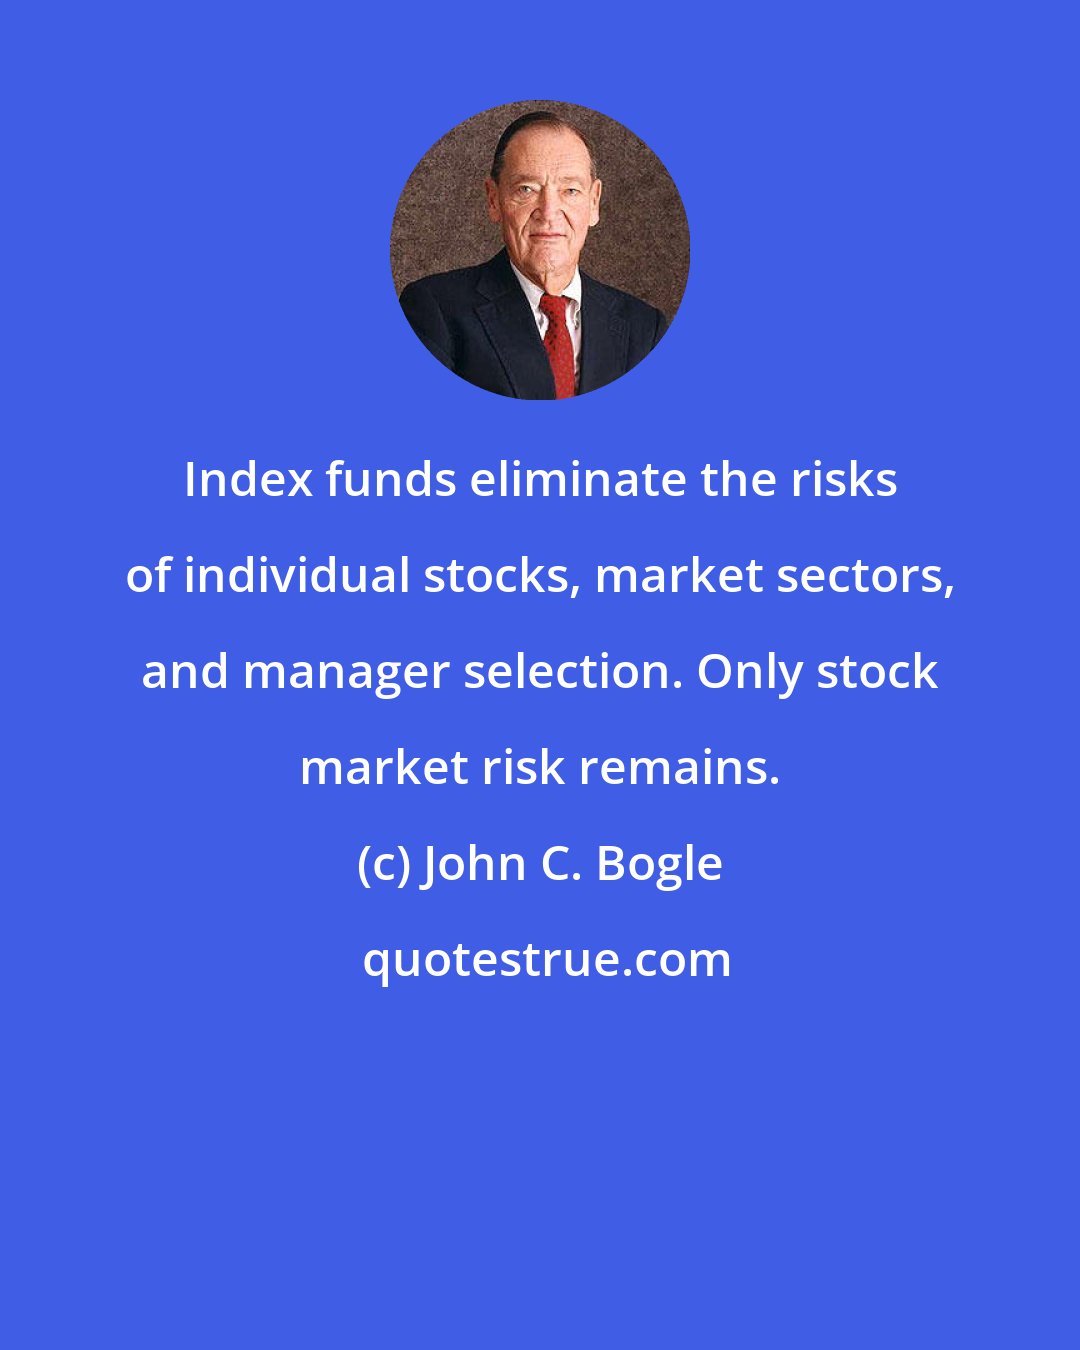 John C. Bogle: Index funds eliminate the risks of individual stocks, market sectors, and manager selection. Only stock market risk remains.